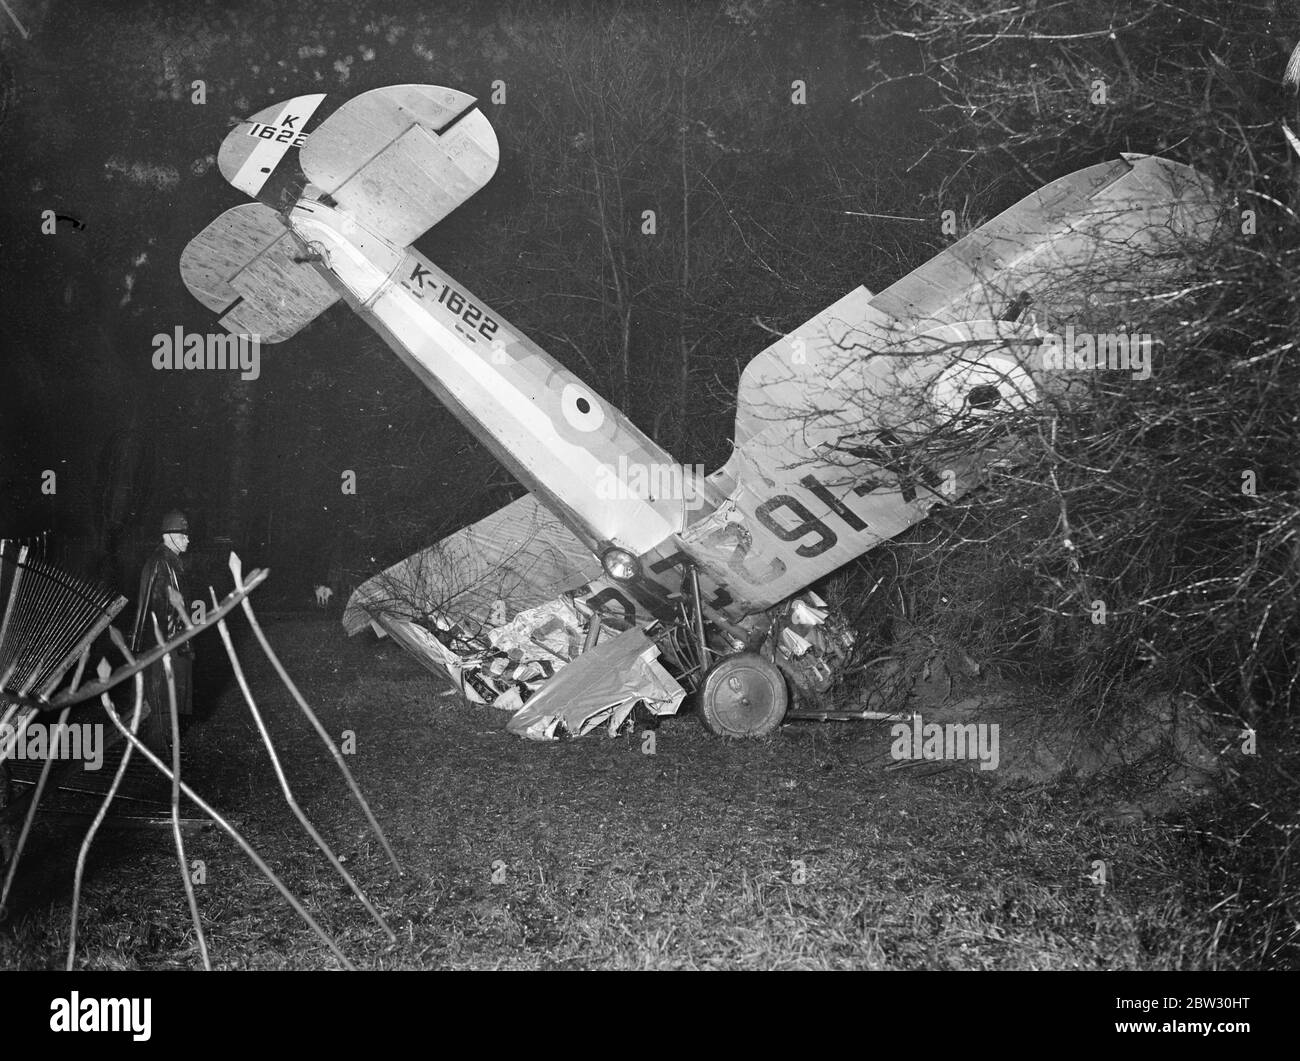 RAF planes crashes in London Park . A pilot flying a Royal Air Force plane from Kenley Aerodrome , crashed among a clump of trees at Forster Park , Catford , London . The wrecked plane after the crash at Forster Park , Catford . 11 June 1932 Stock Photo